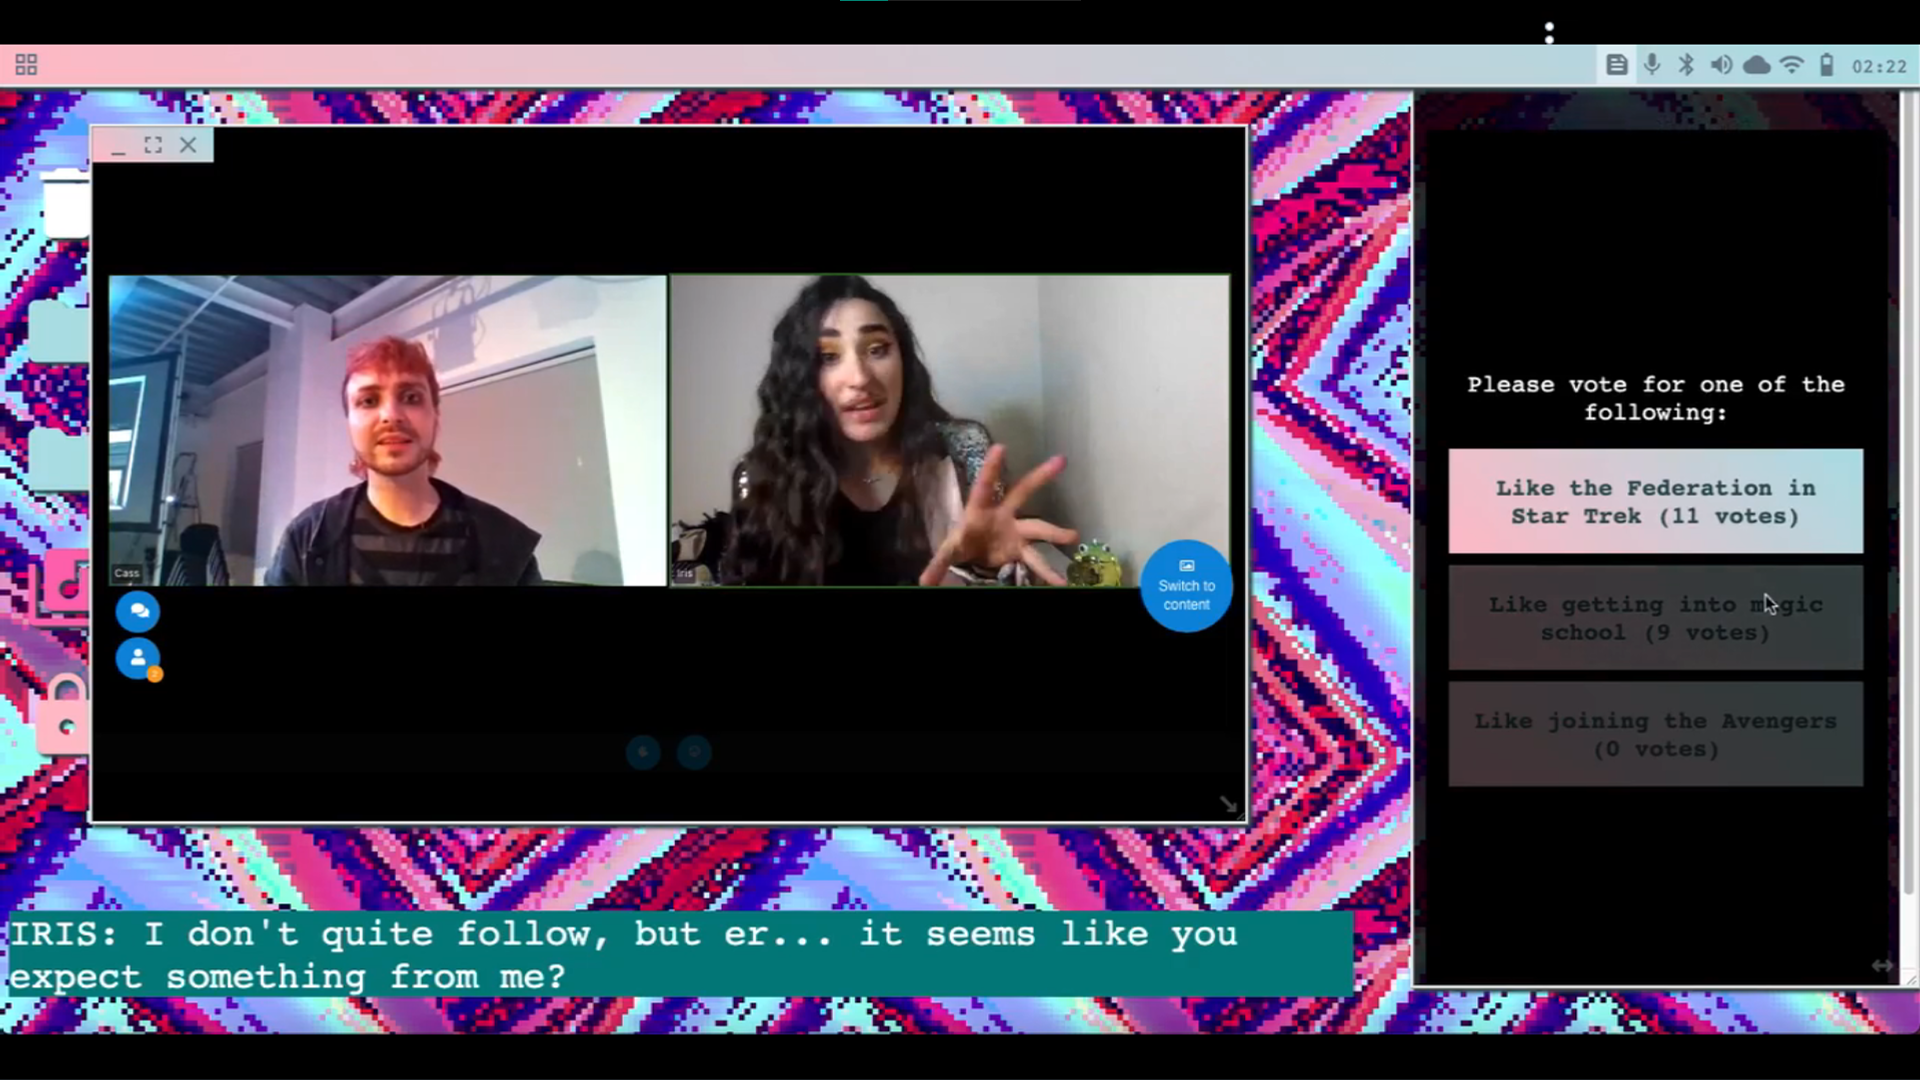 A still from an Intrapology show, appears to depict a neon pink and blue themed computer desktop including a video call between two non-binary people and a panel on the right with buttons allowing the audience to vote among a selection of fictional institutions